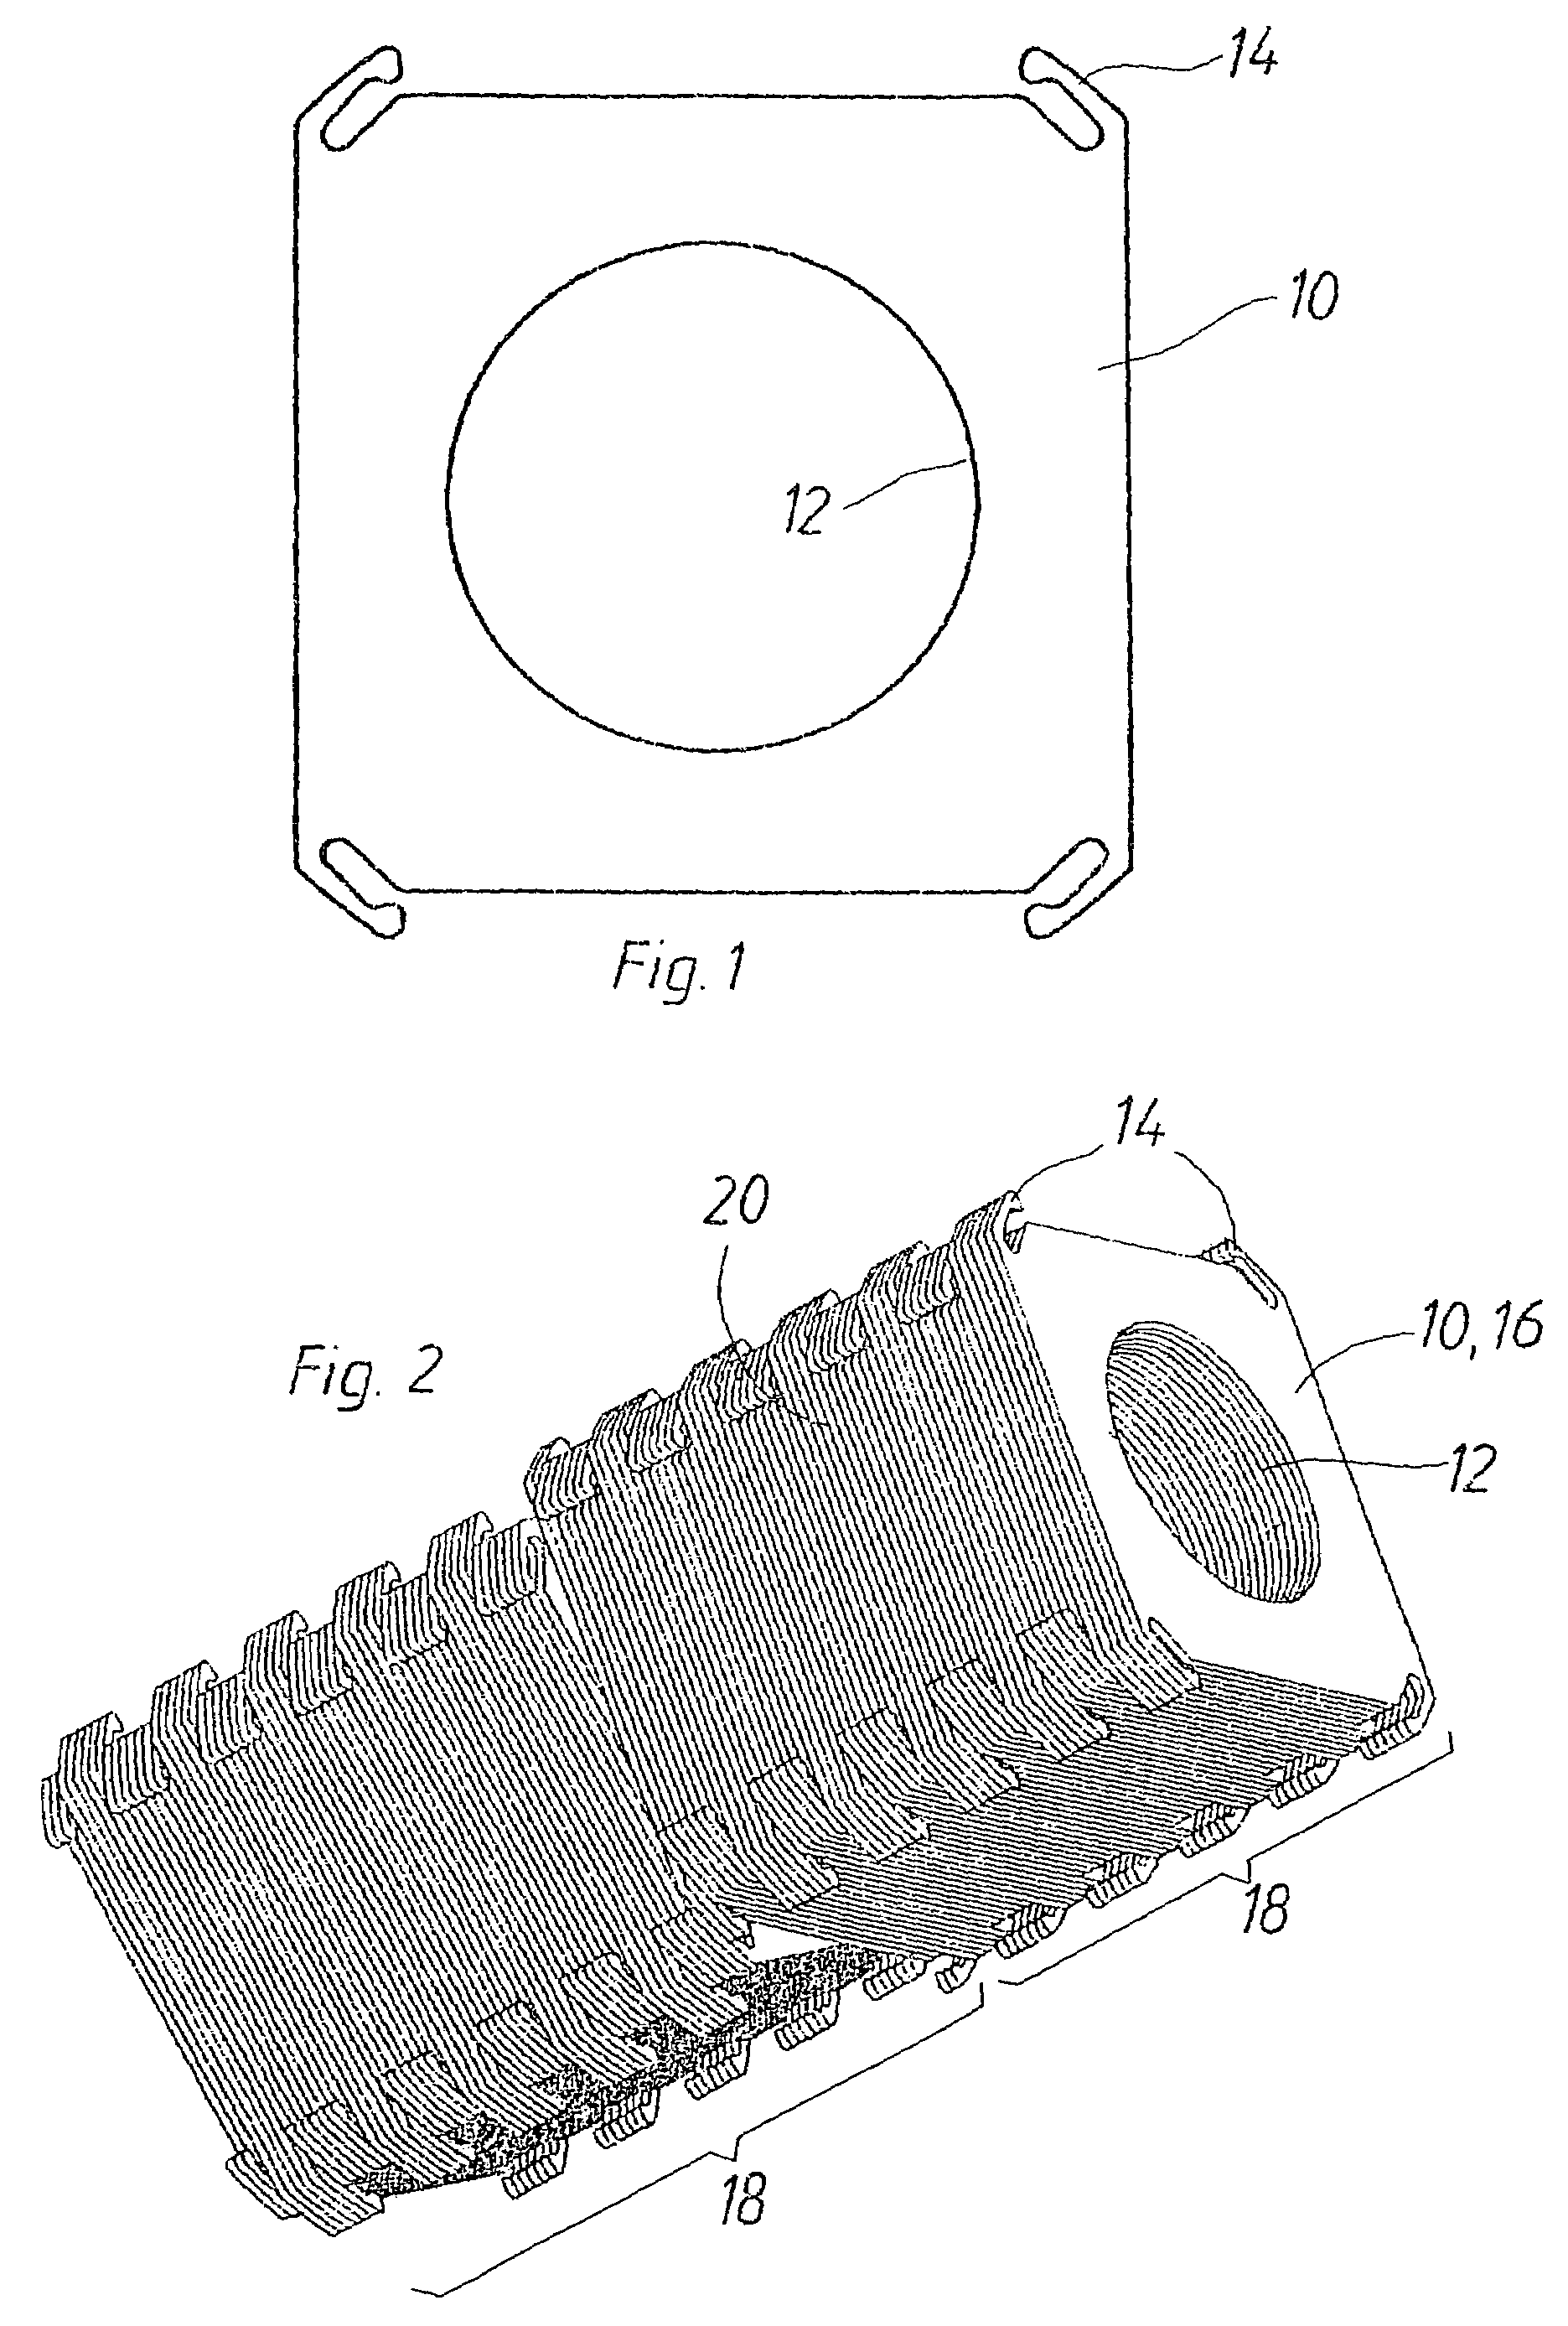 Magnetic return path and permanent-magnet fixing of a rotor